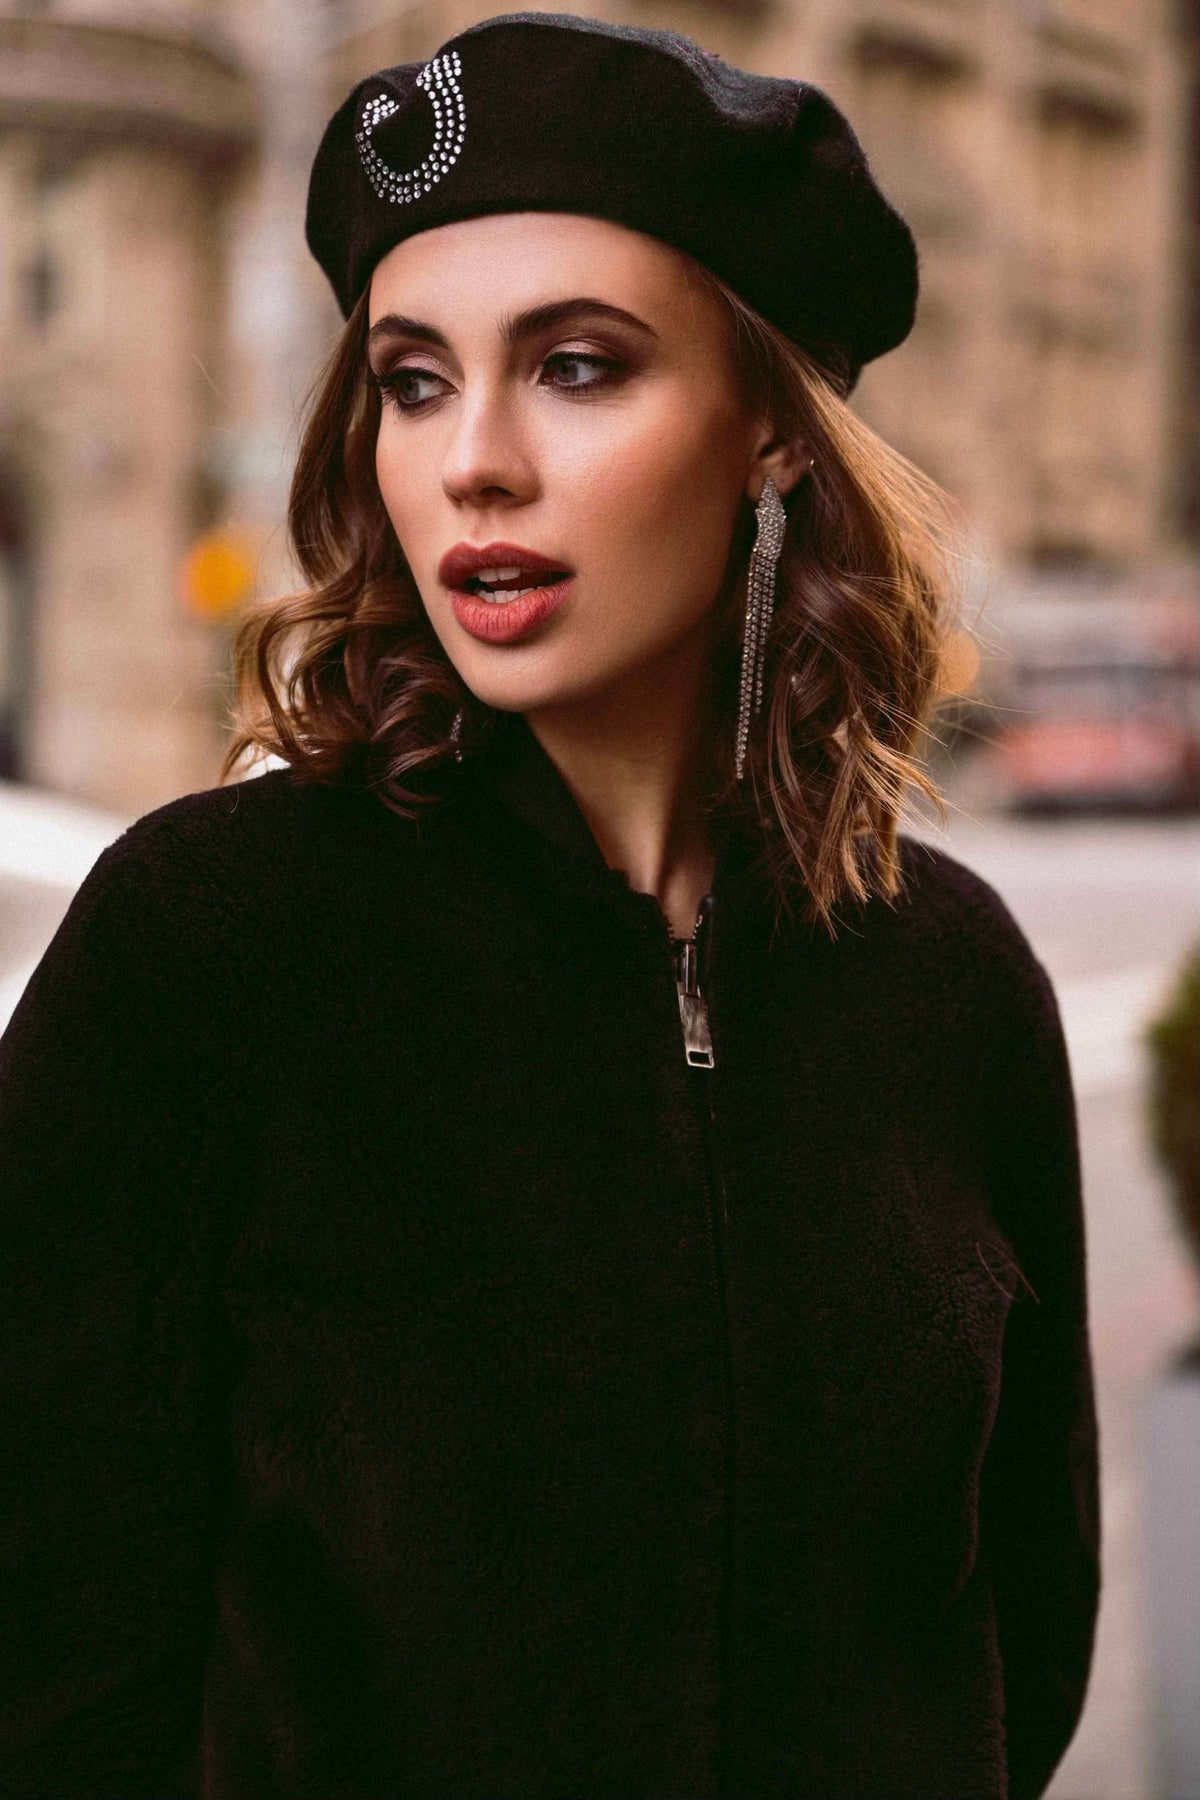 The Texas Beret in Black